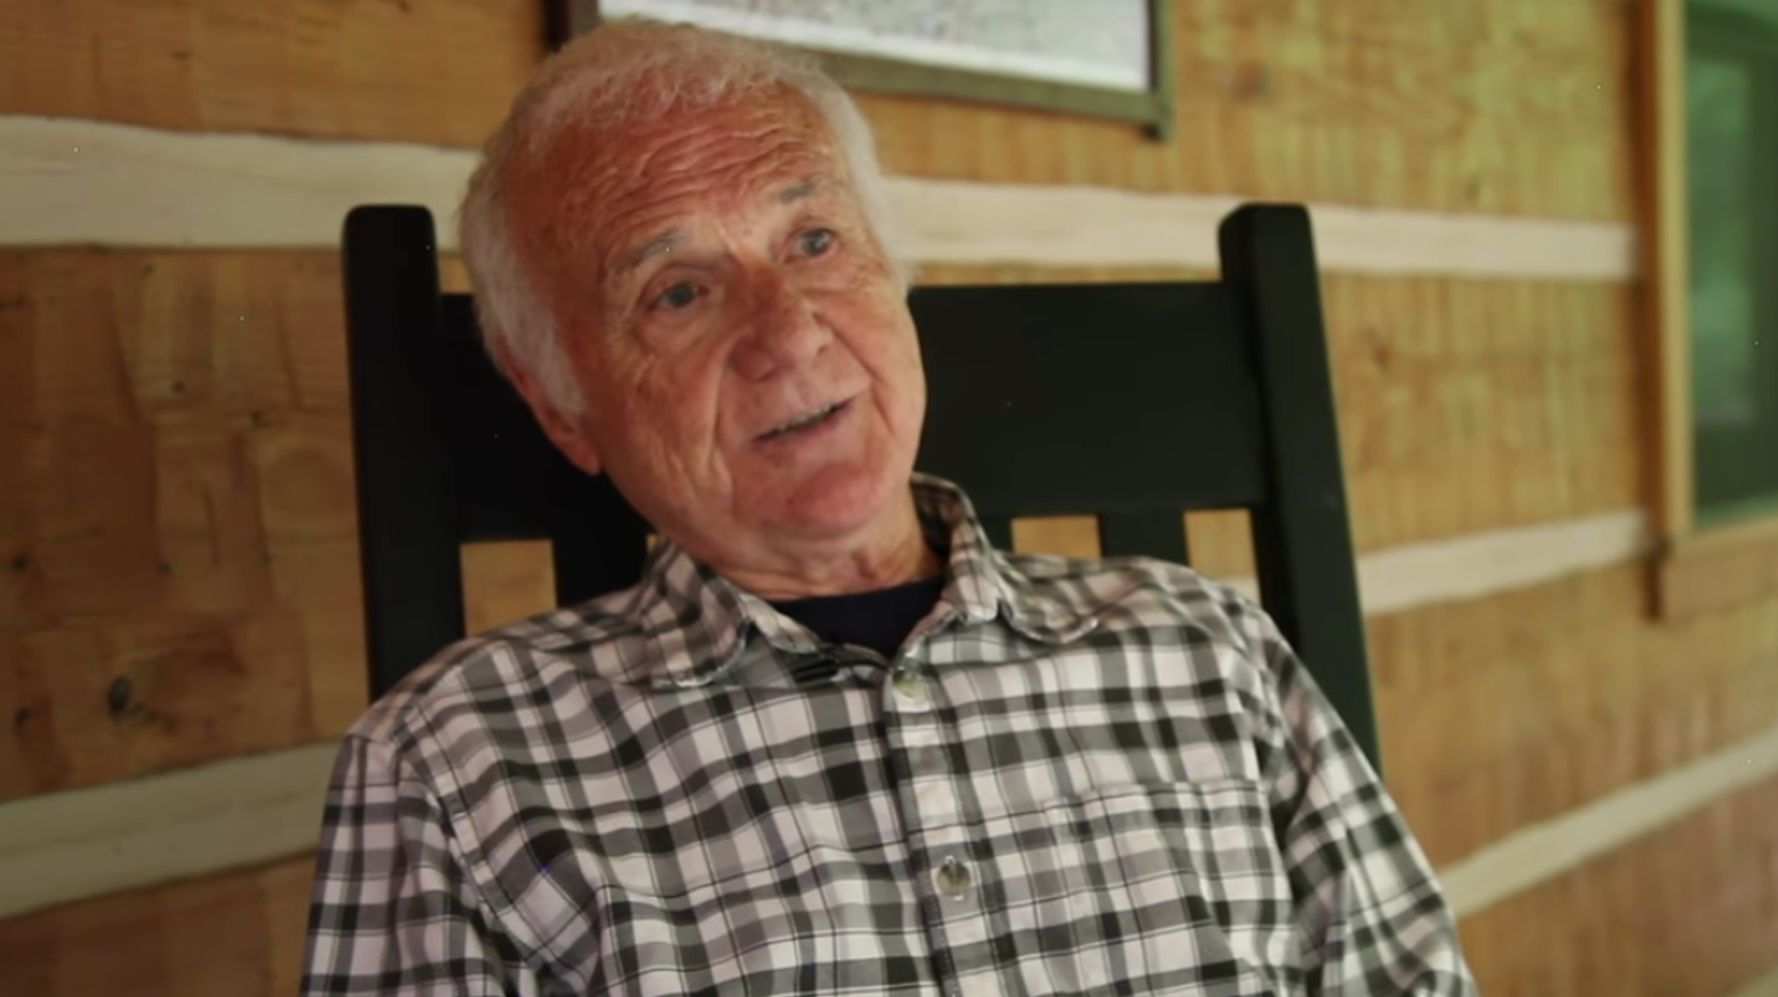 Old Man Small Teen - This 83-Year-Old Man Just Starred In His First Porn | HuffPost